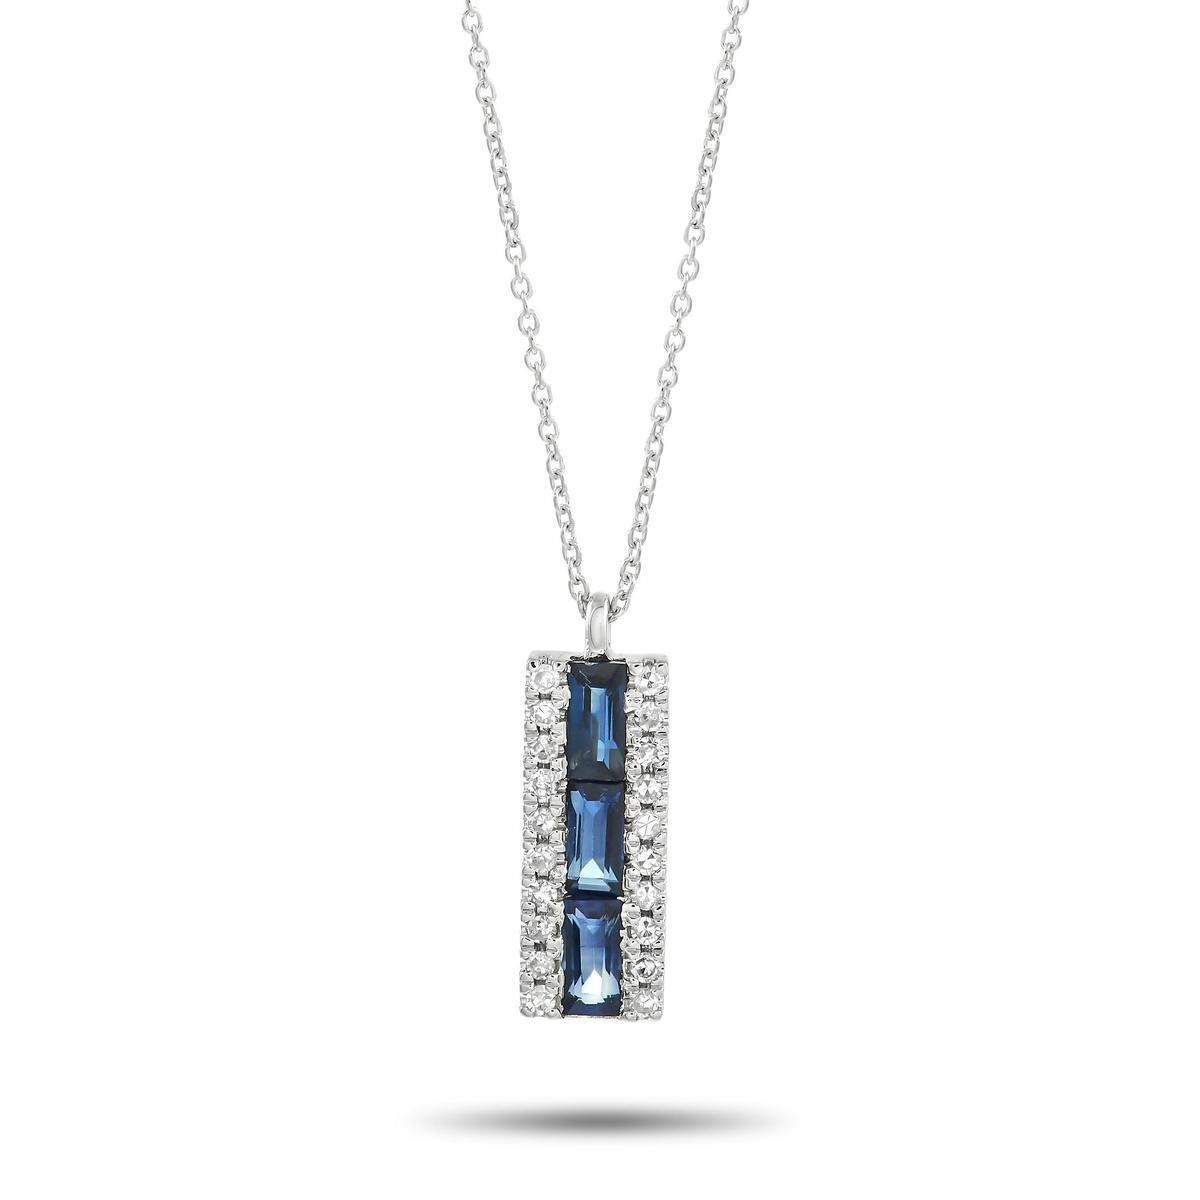 14K White Gold 0.10ct Diamond and Sapphire Necklac